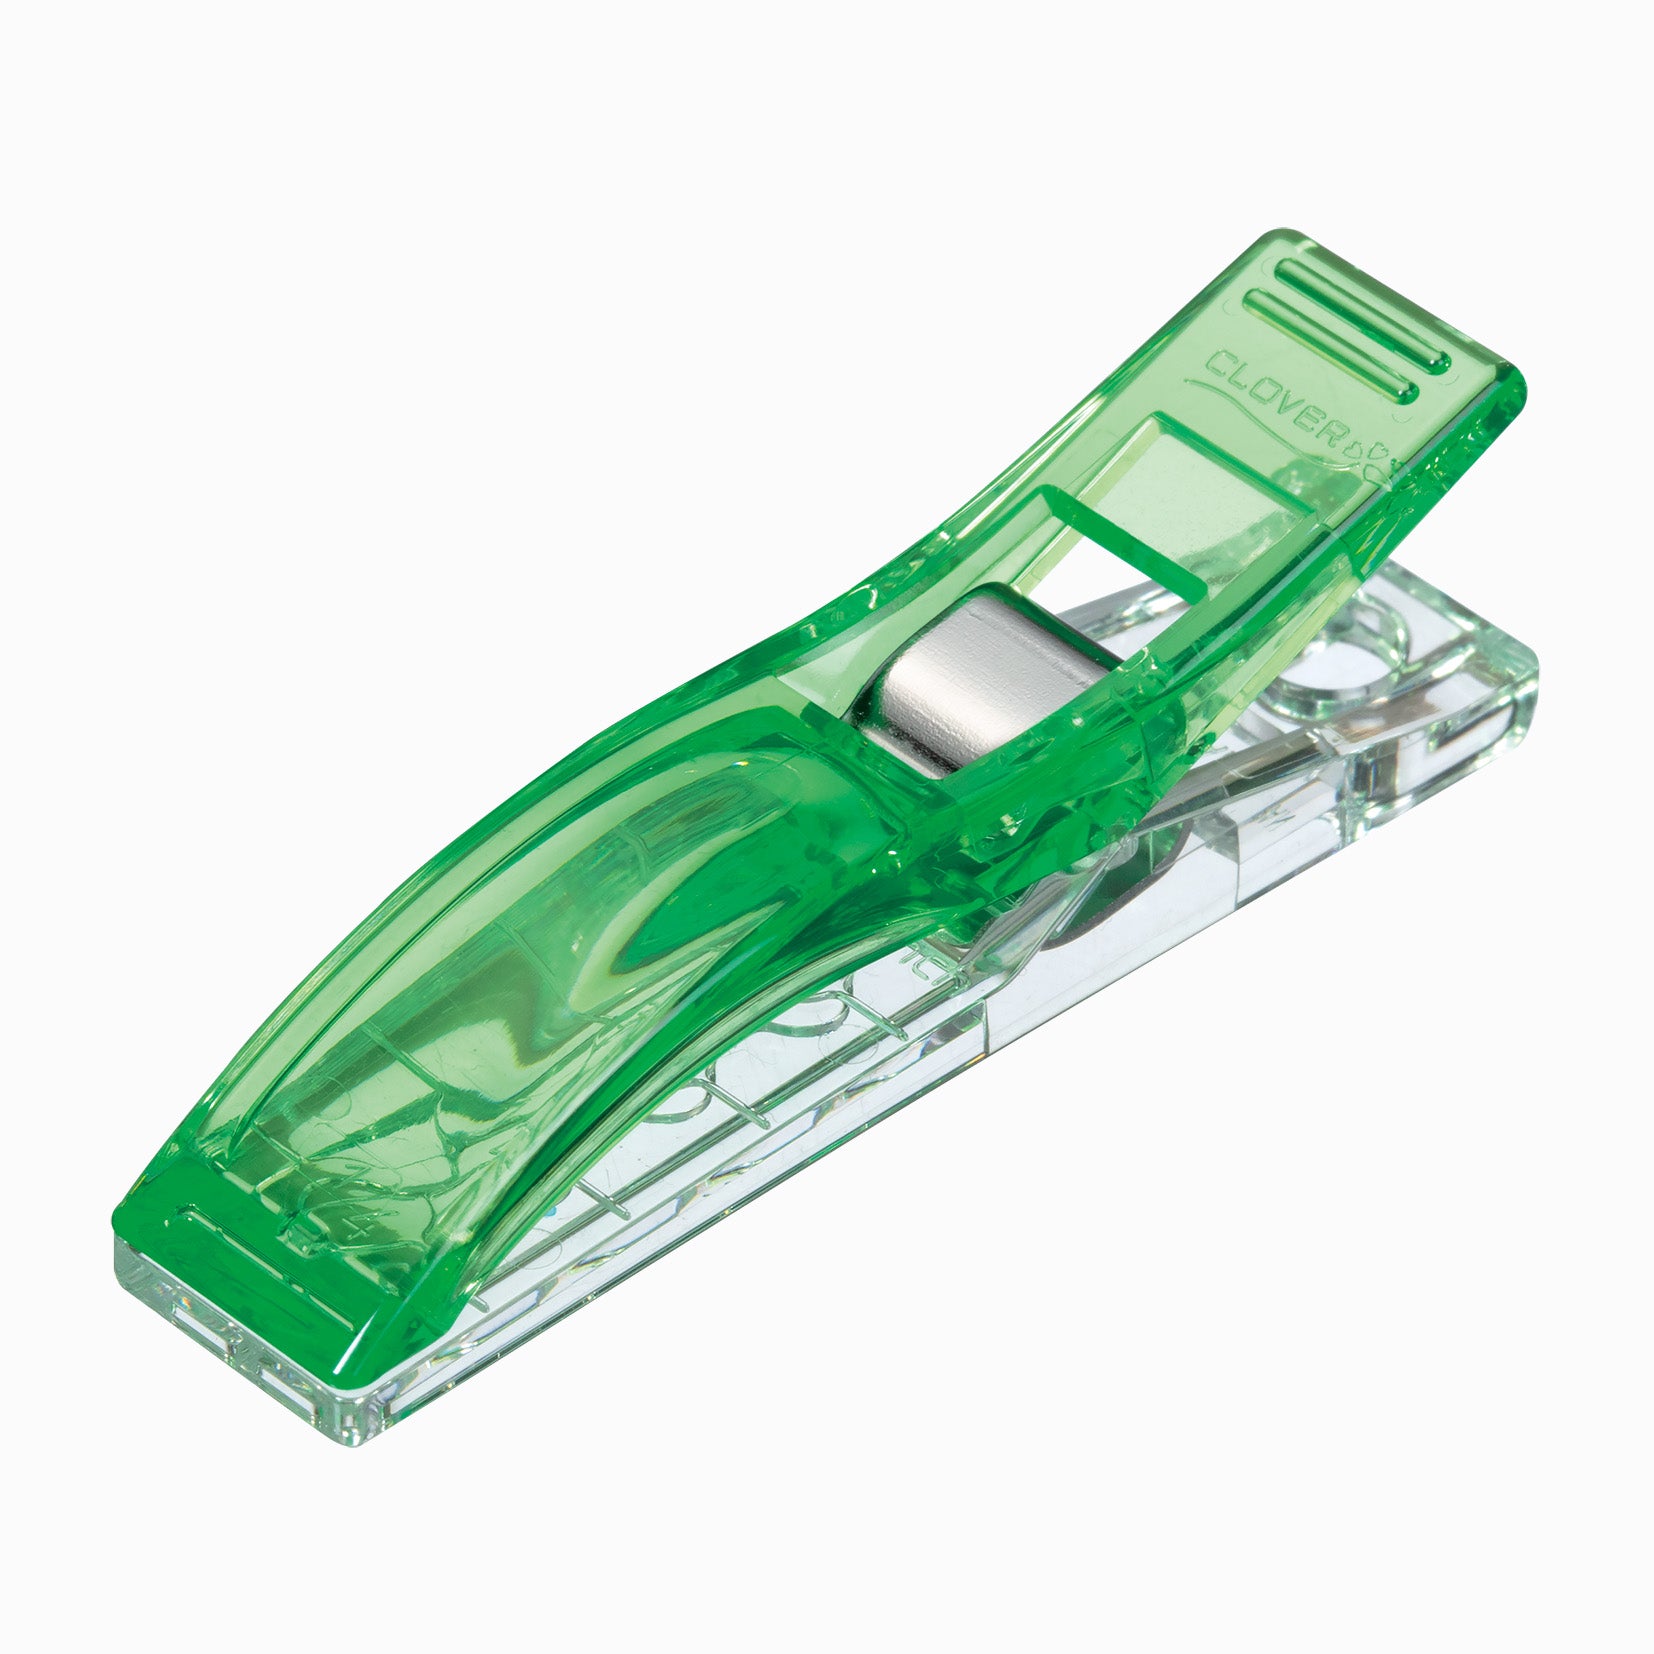 Wonder Clips, Box of 50 ct. - ASSORTED COLORS – The Singer